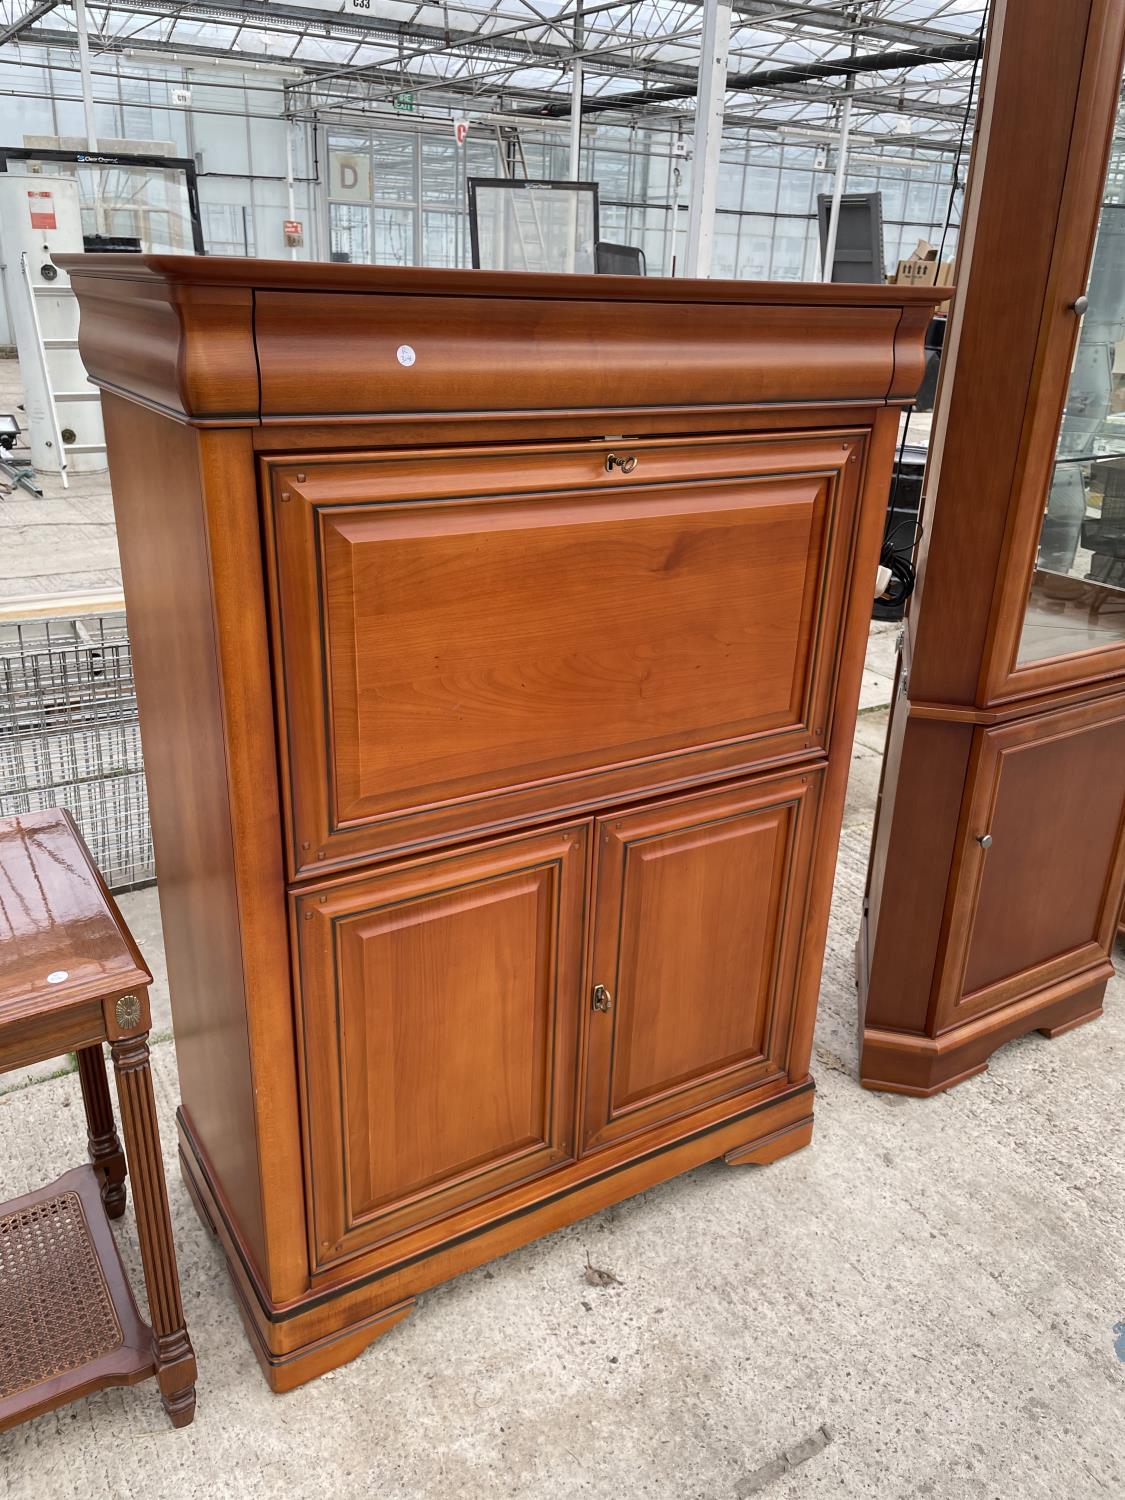 A CHERRY WOOD BUREAU CABINET WITH FALL FRONT, UPPER SECRET DRAWER AND TWO LOWER DOORS